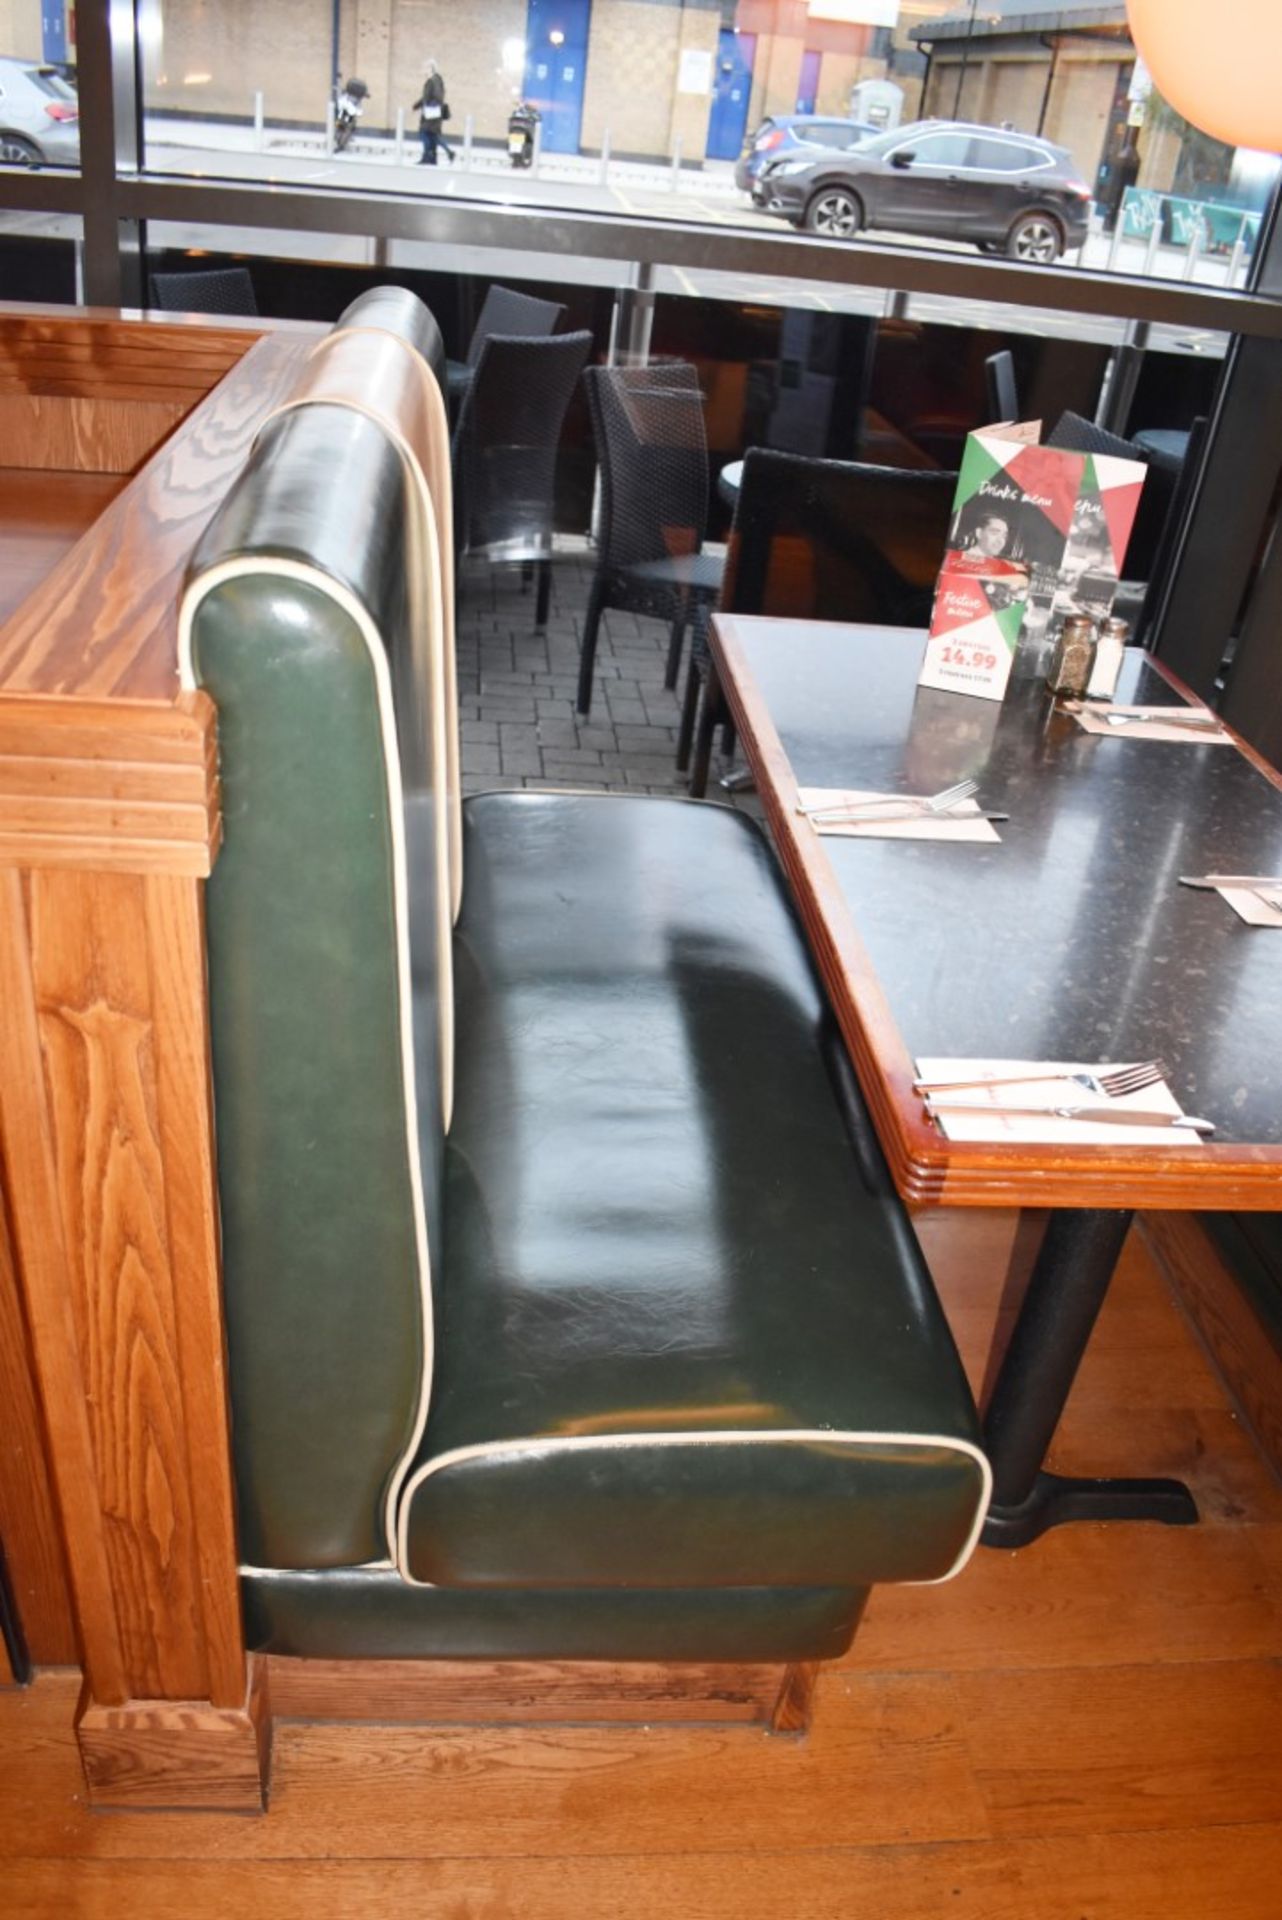 3 x Sections of Booth Seating - Upholstered in a Green and Cream Retro Style Faux Leather Upholstery - Image 3 of 6